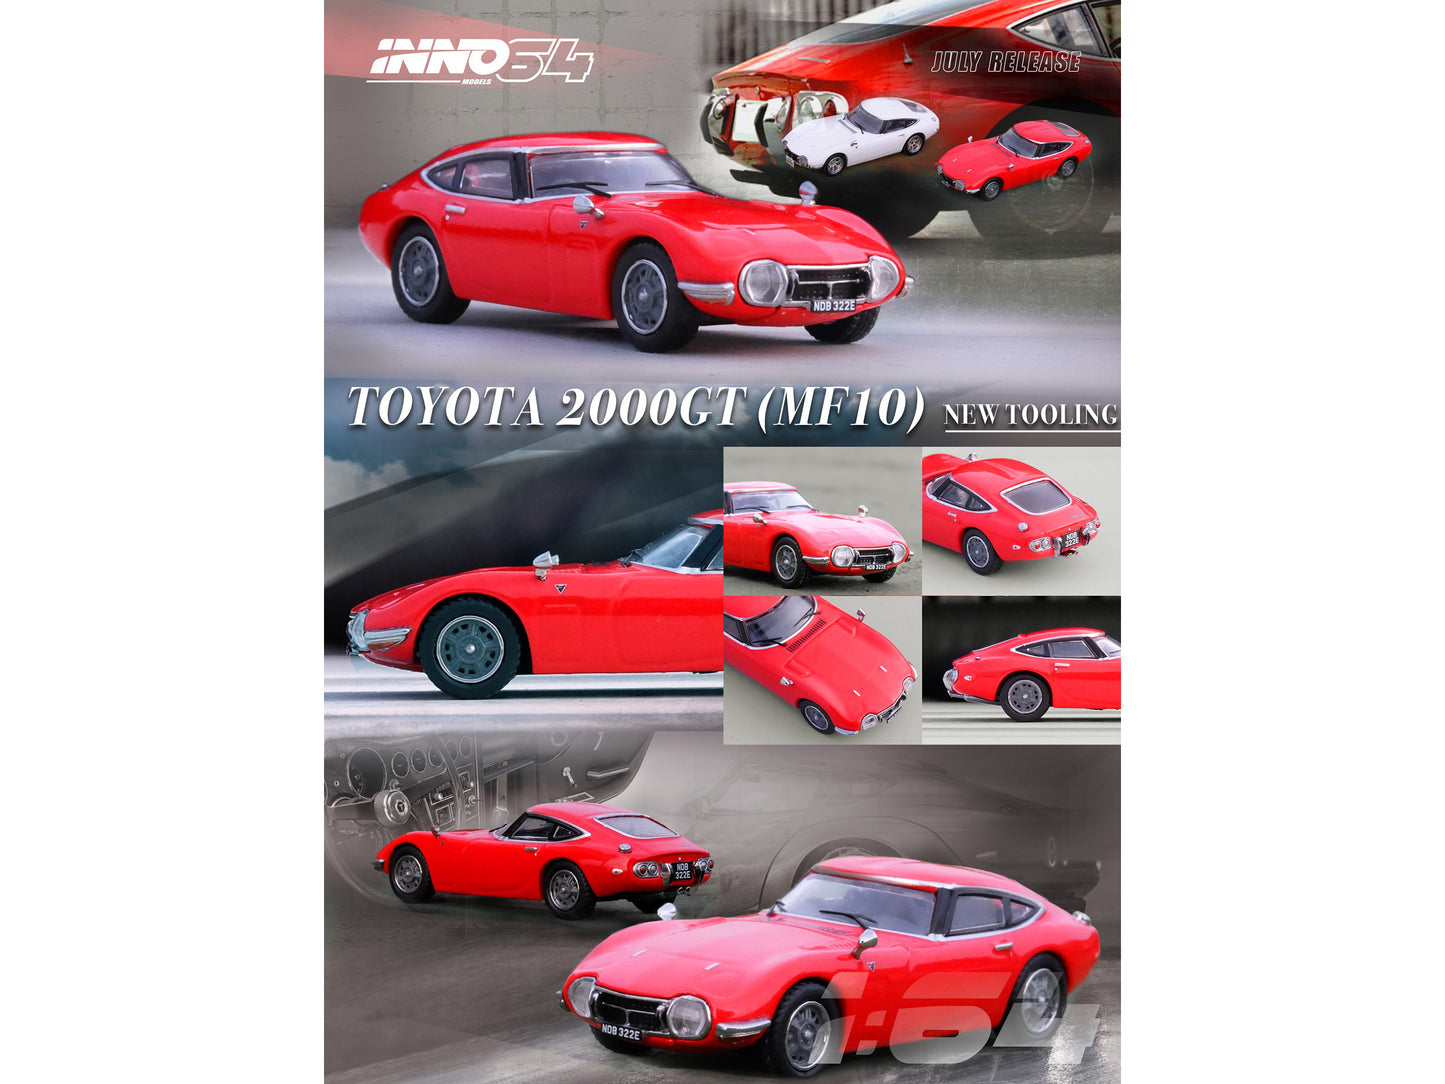 Brand new 1/64 scale diecast car model of Toyota 2000GT (MF10) RHD (Right Hand Drive) Solar Red die cast model car by In